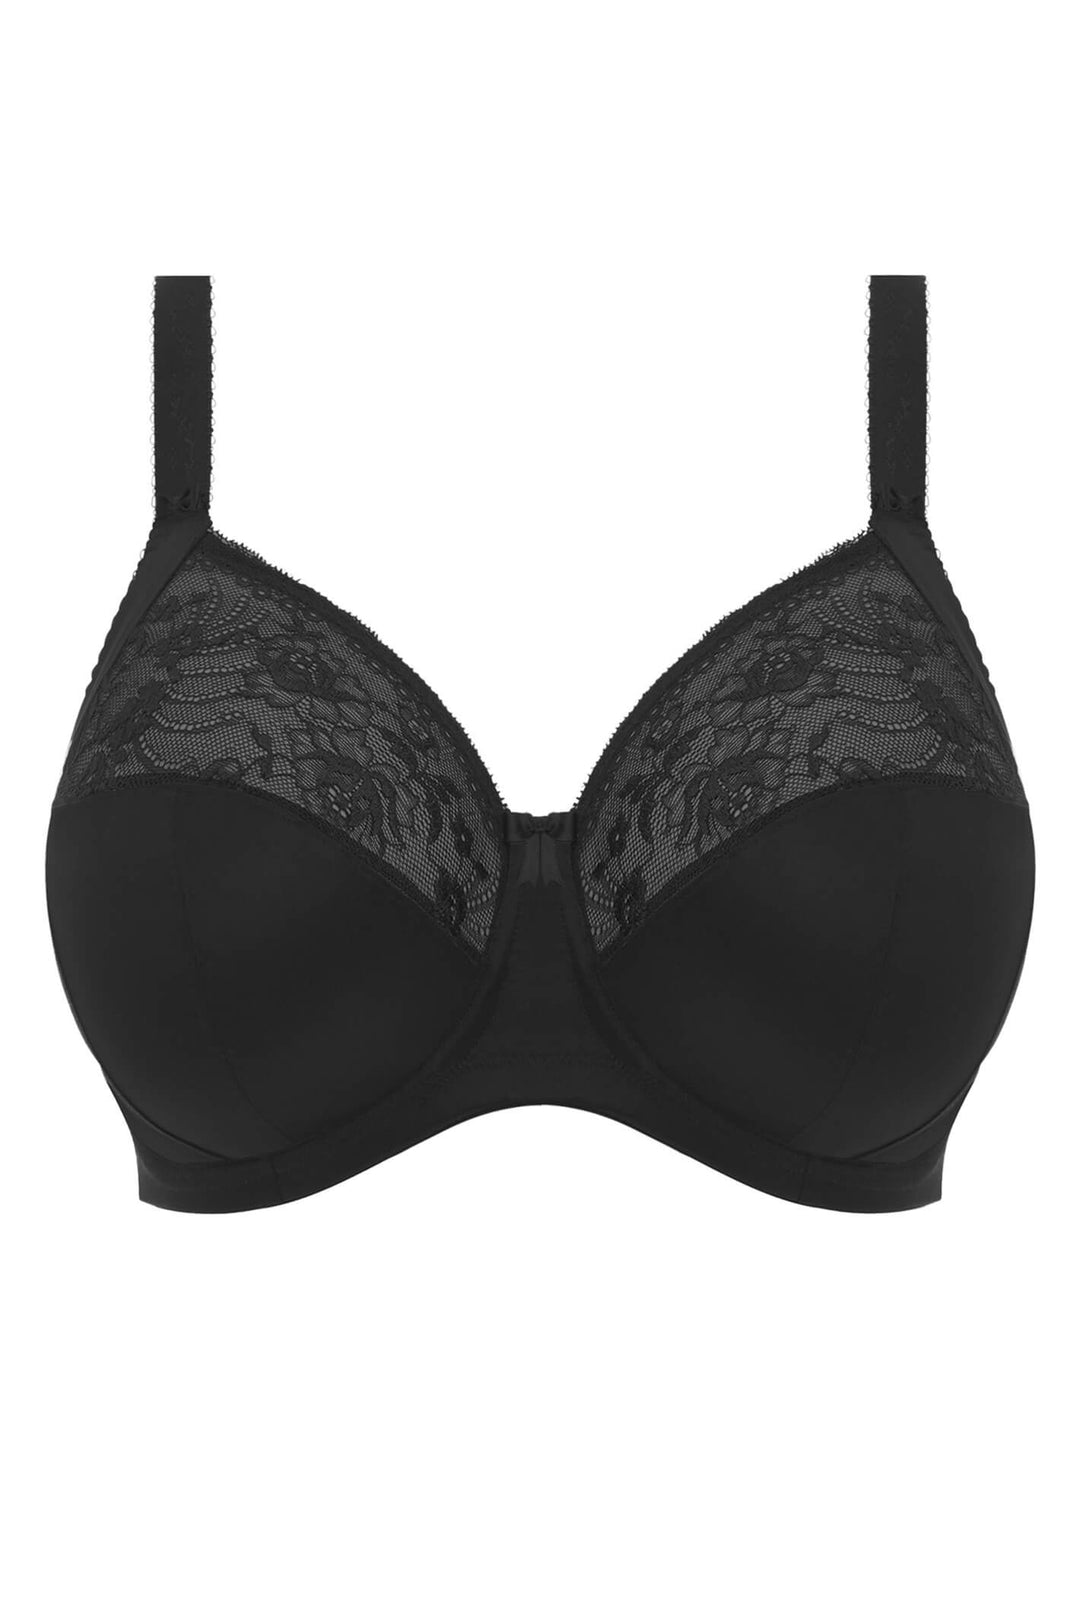 Elomi EL4111BLK Morgan Black Stretch Banded Underwired Full Cup Bra - Rouge Boutique Inverness